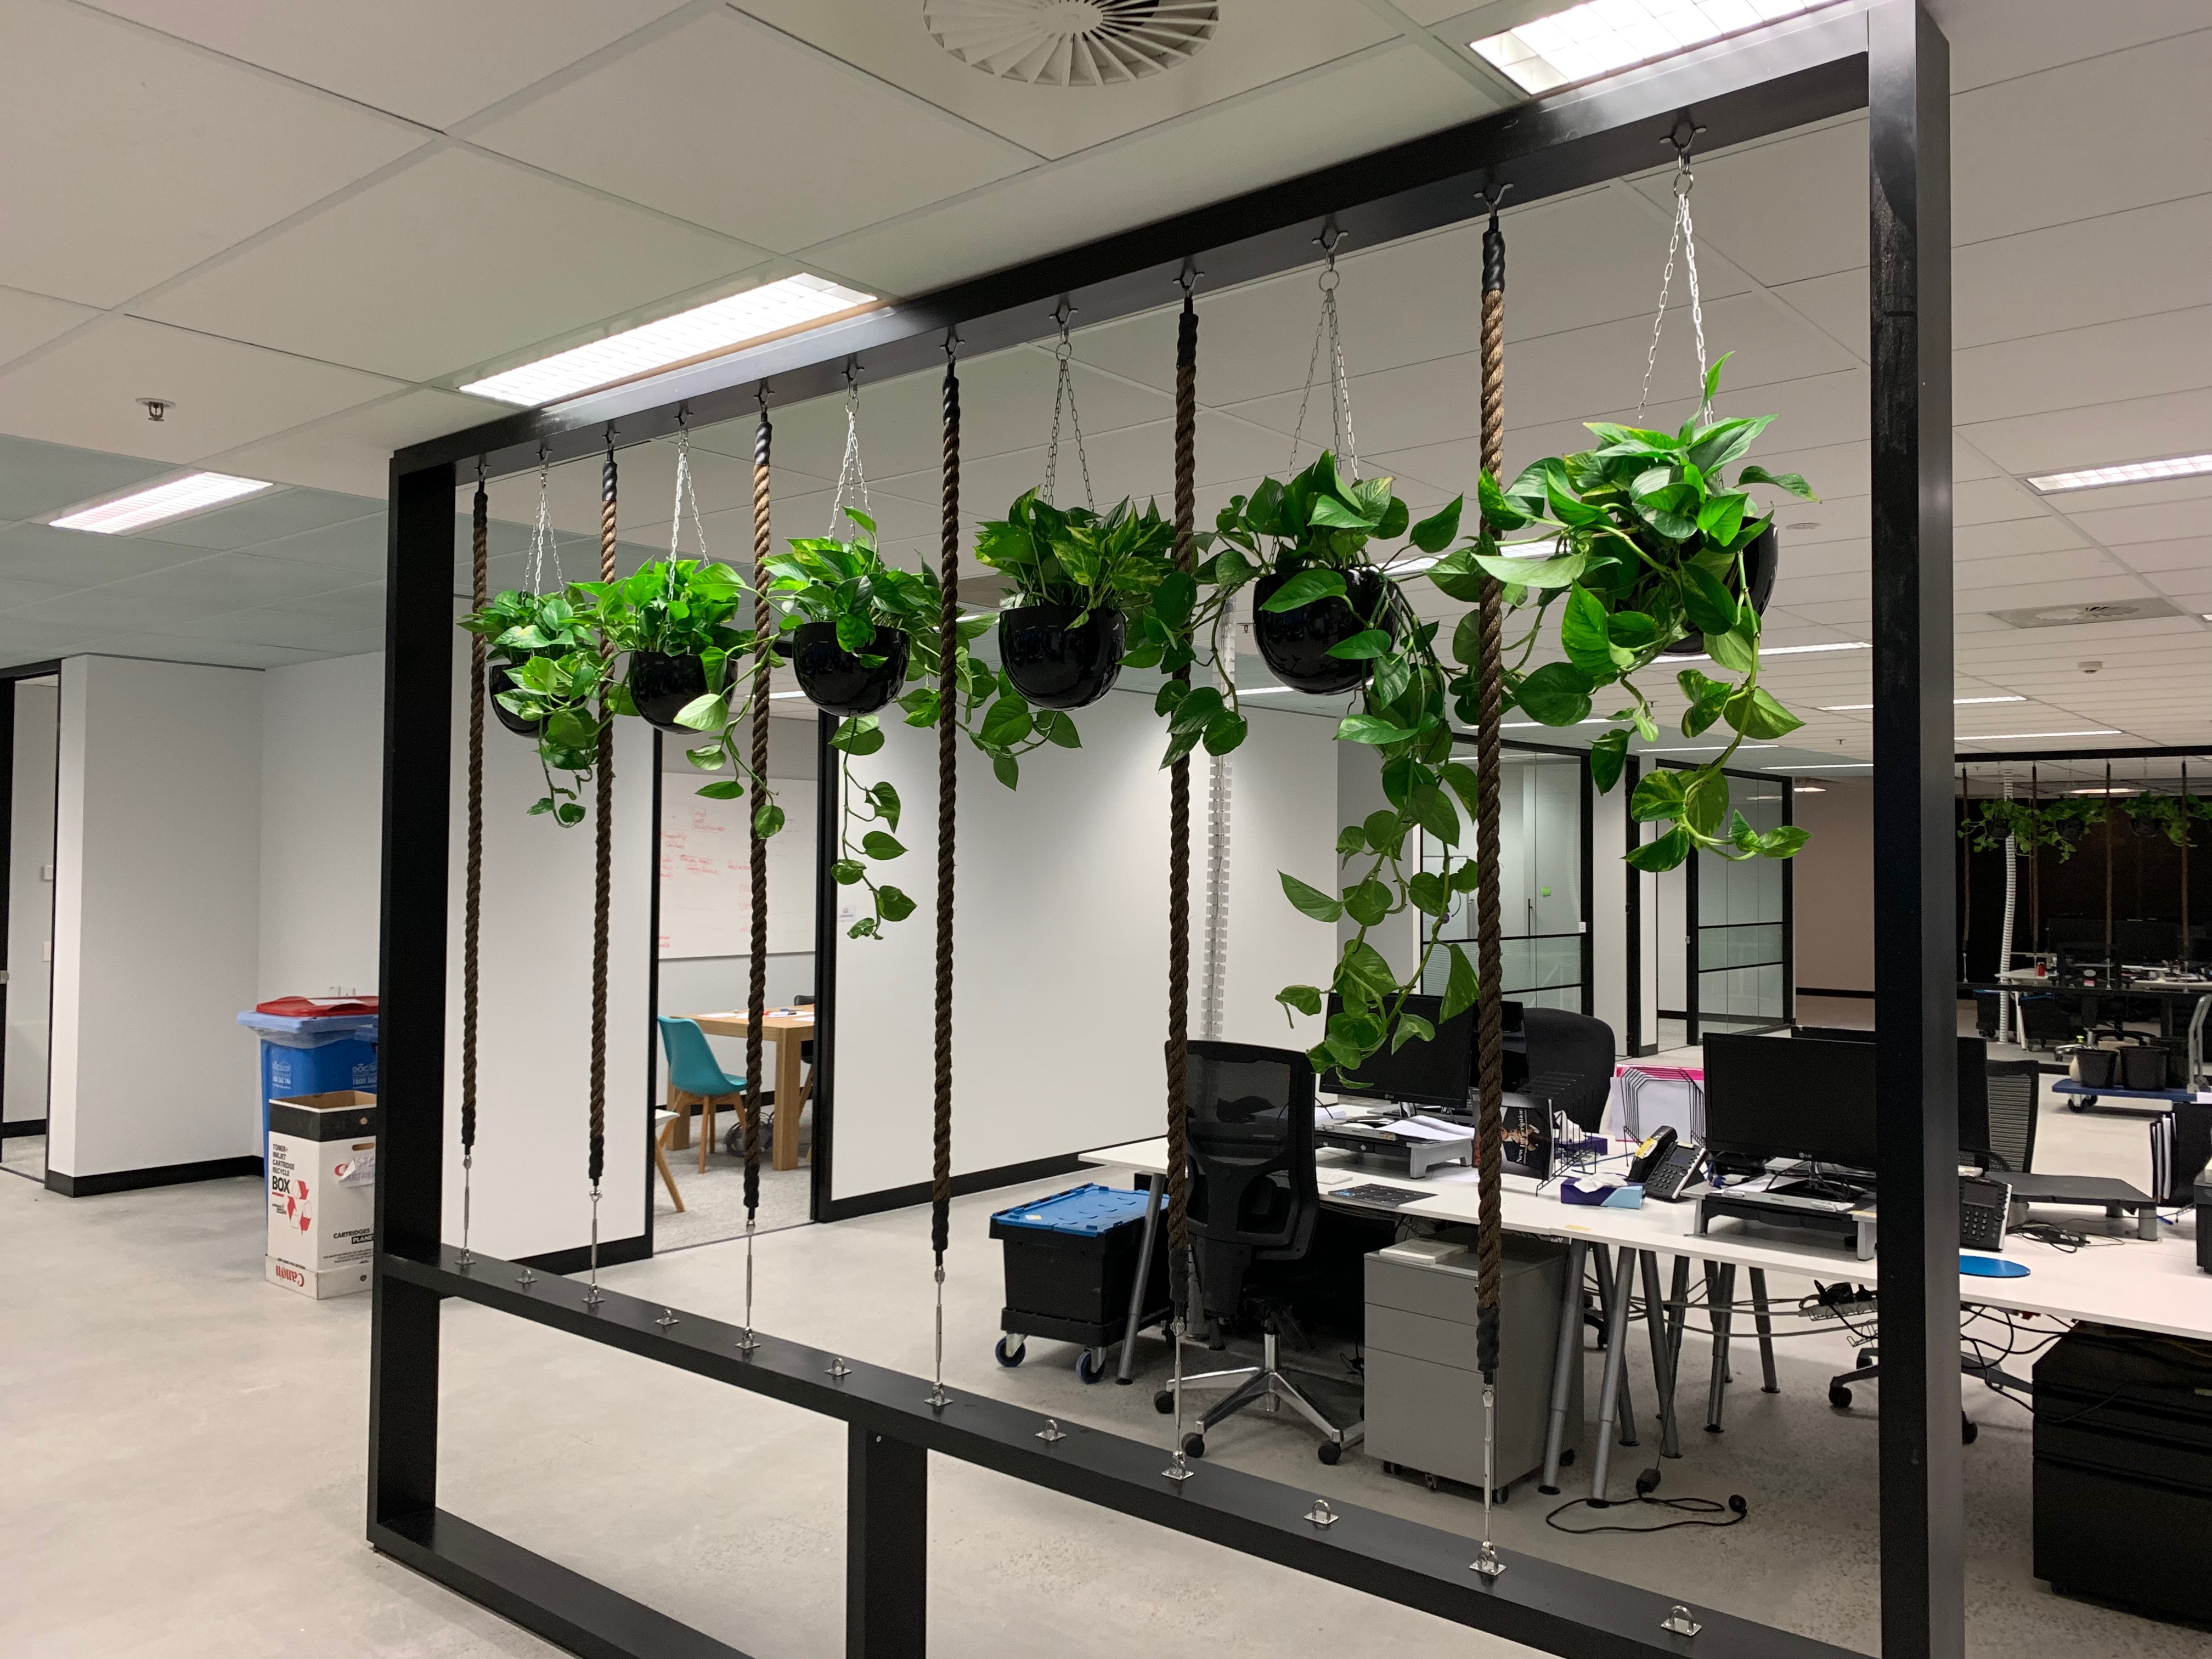 Devil's Ivy in Hanging Planters